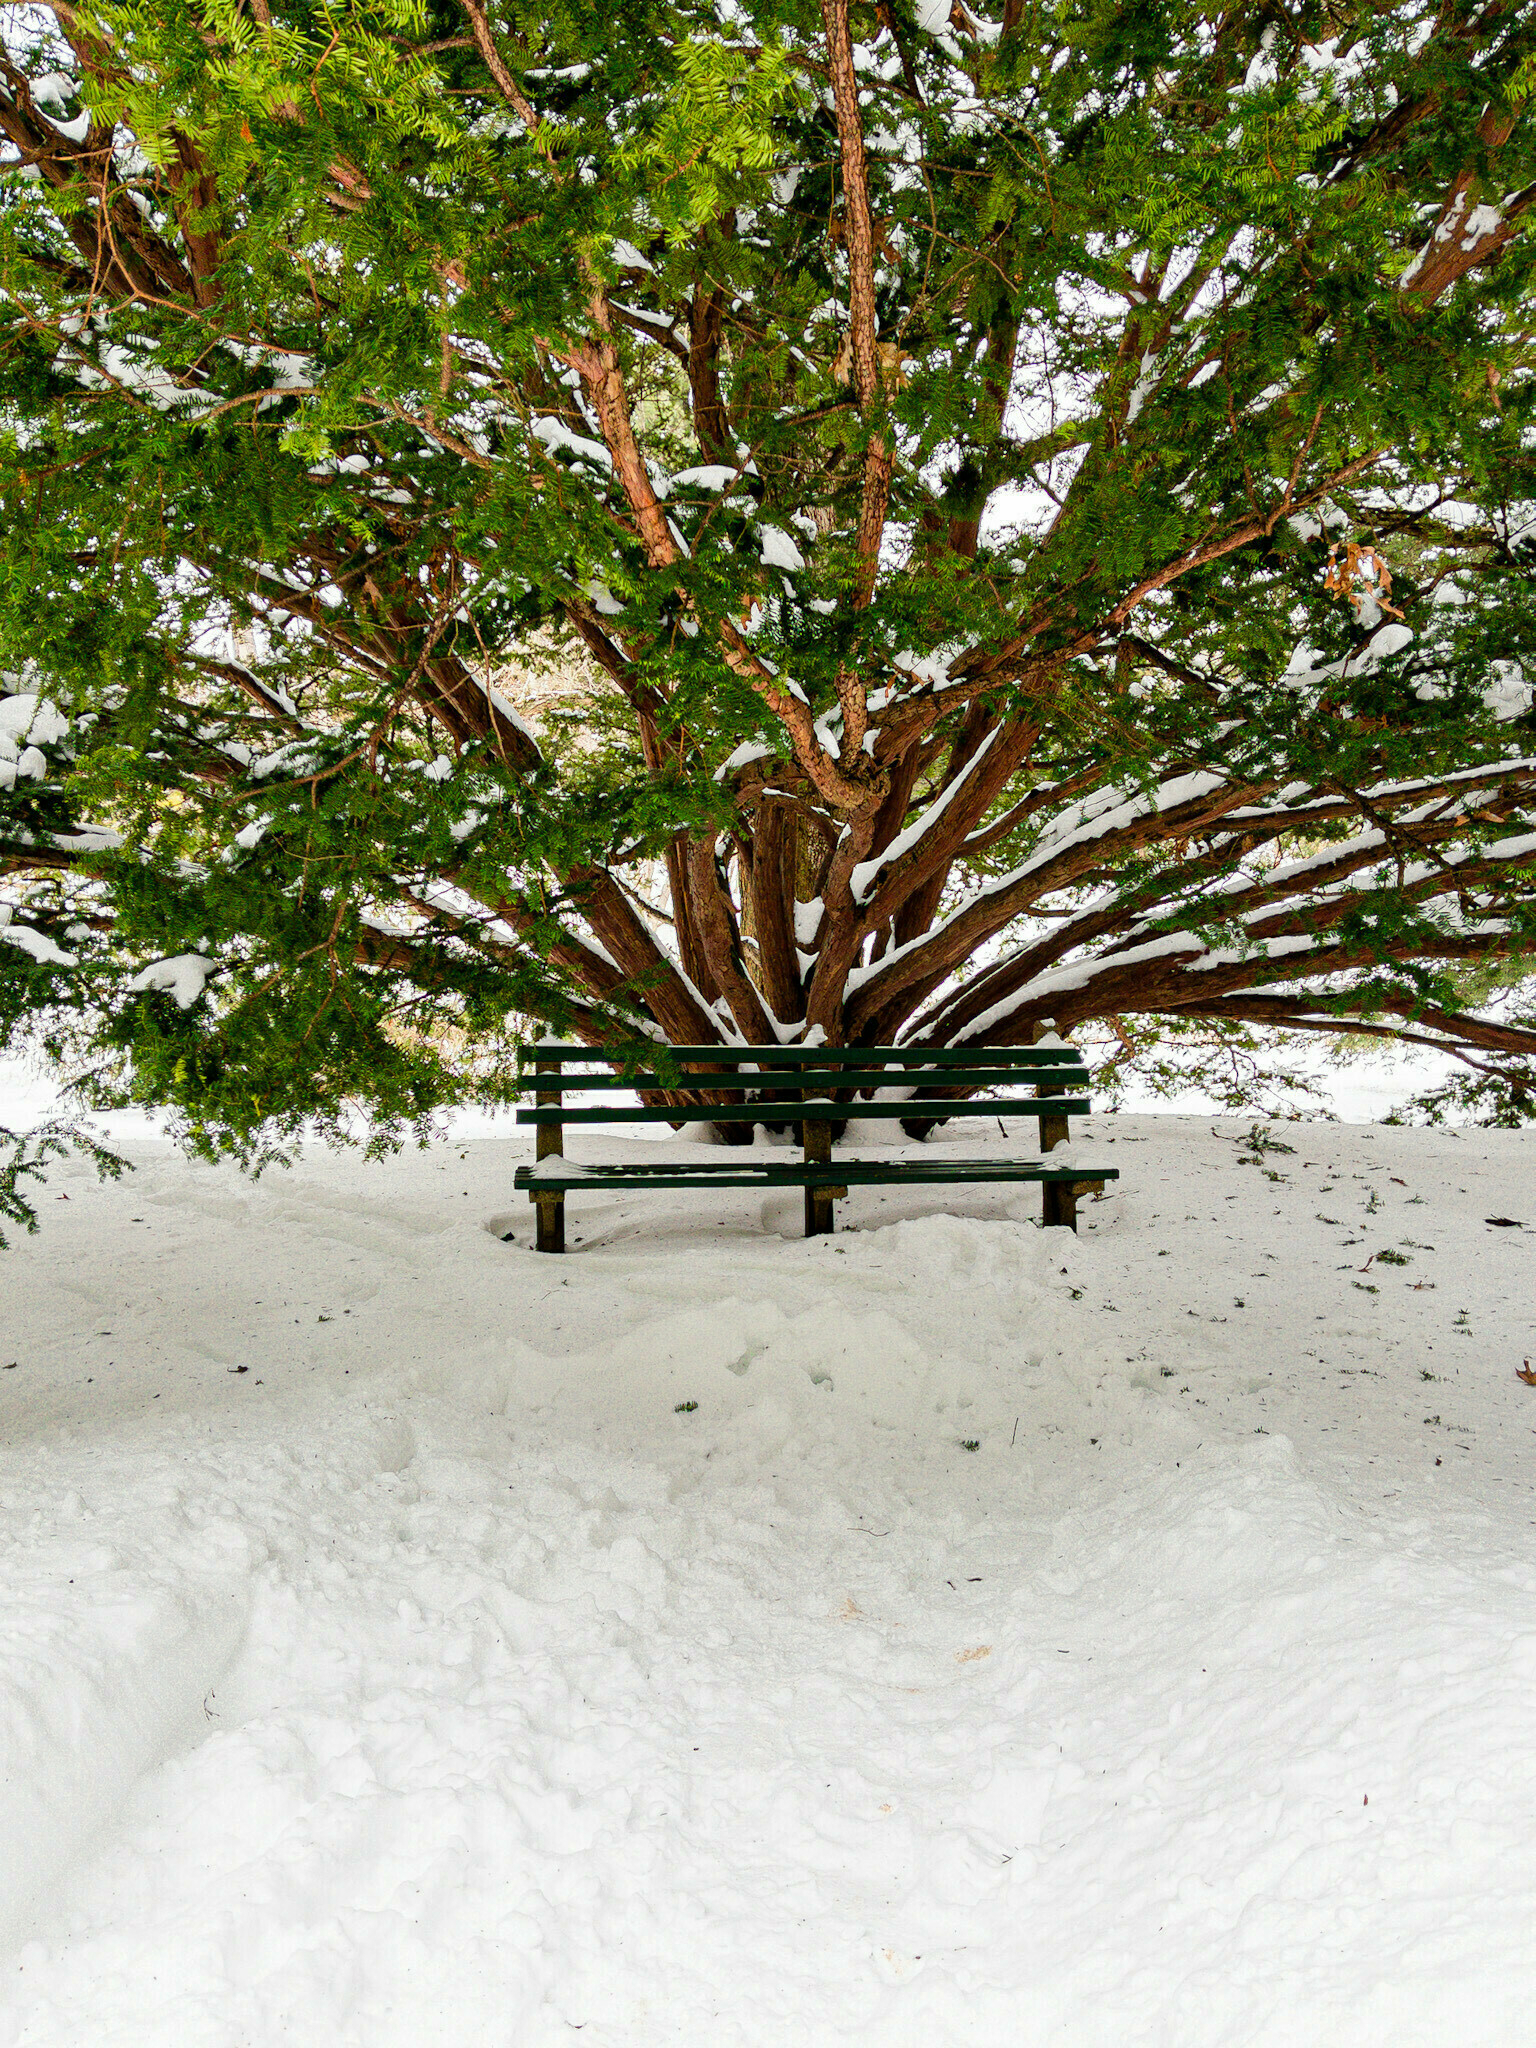 A wintery view - an evergreen spreading its snowclad fronds over a bench. Snow everywhere on the ground. 